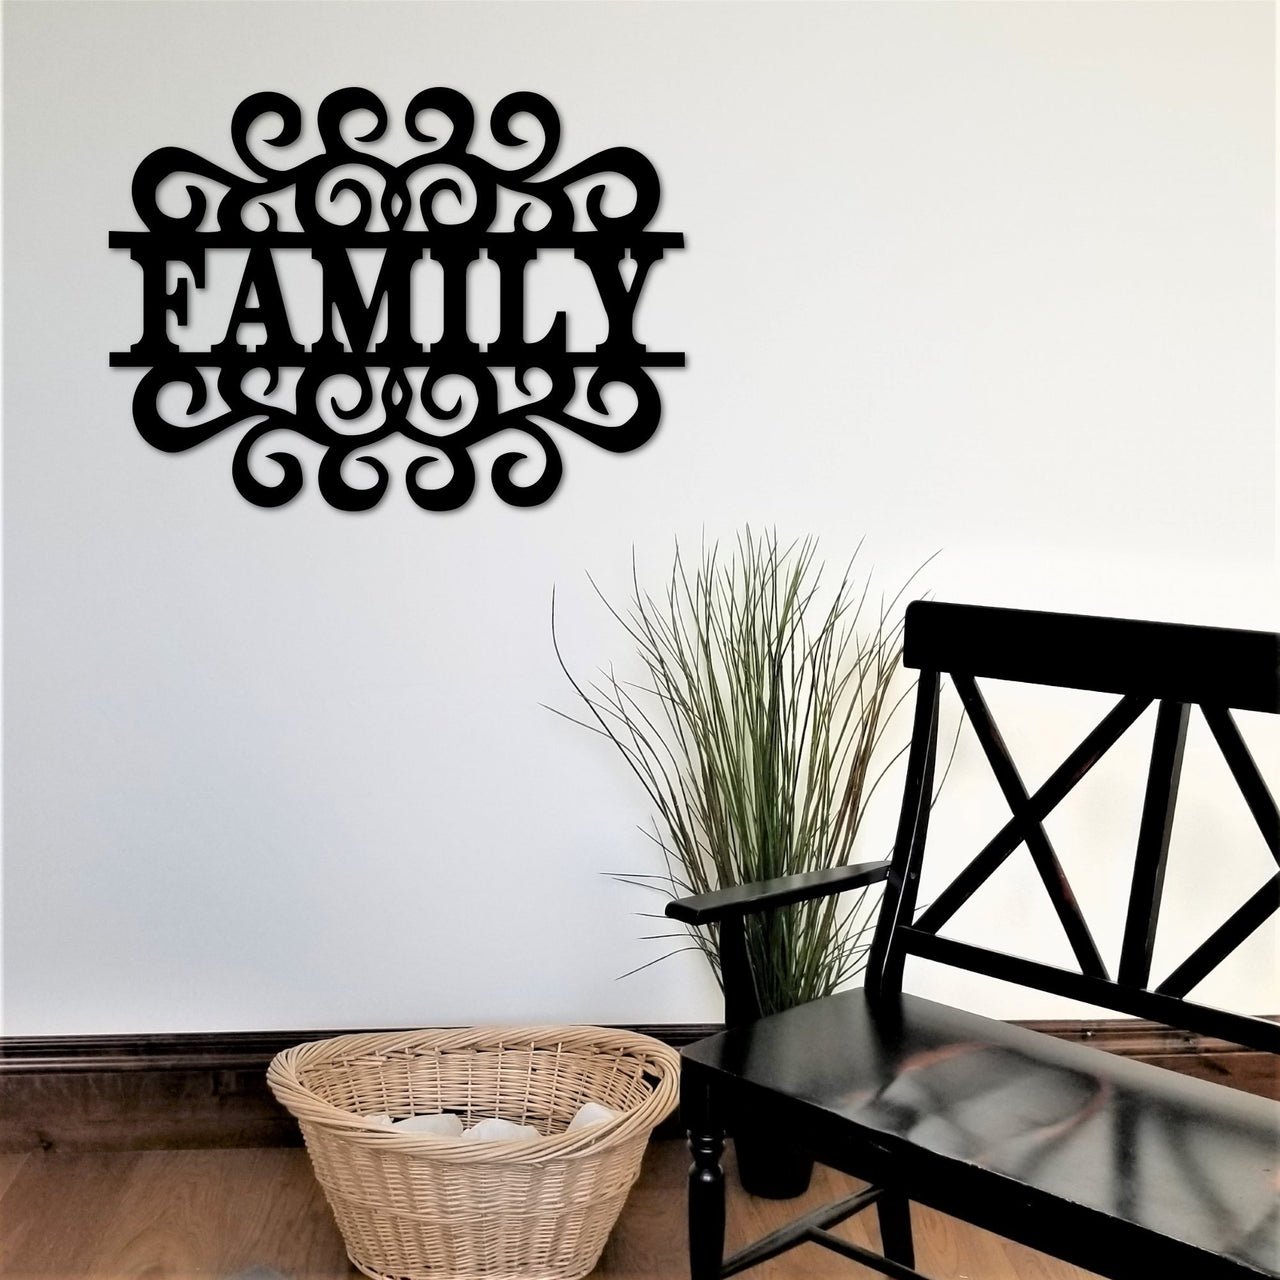 Family Metal Word Art with Scrolls |Metal Family Sign | Gallery Wall Decor | Housewarming Gift | Living Room Decor | Gift Idea for Her